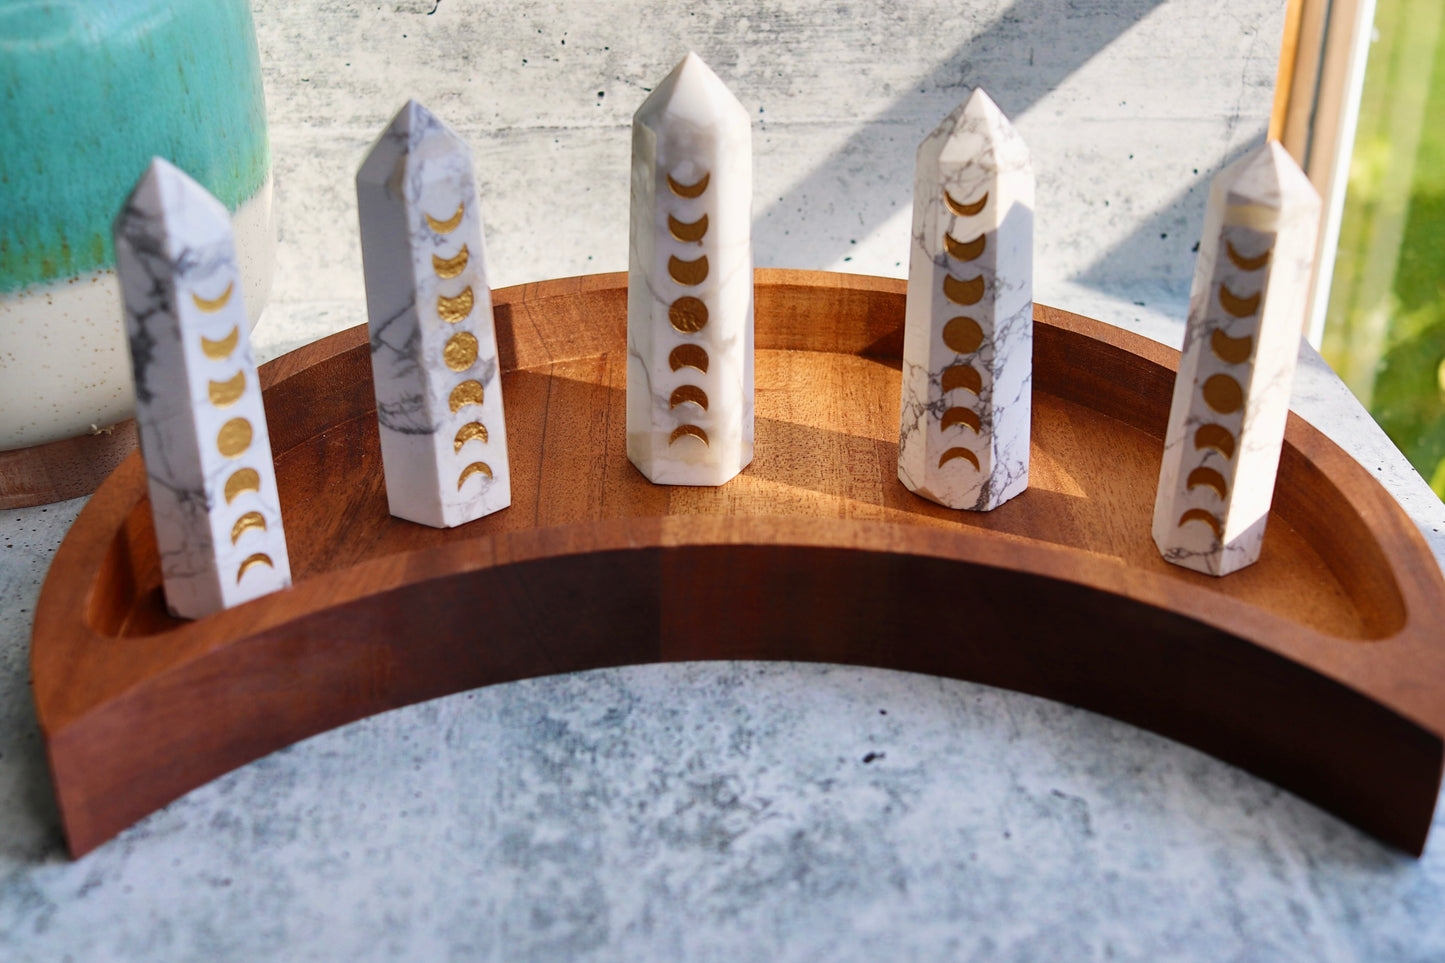 Moon Phase Howlite Tower